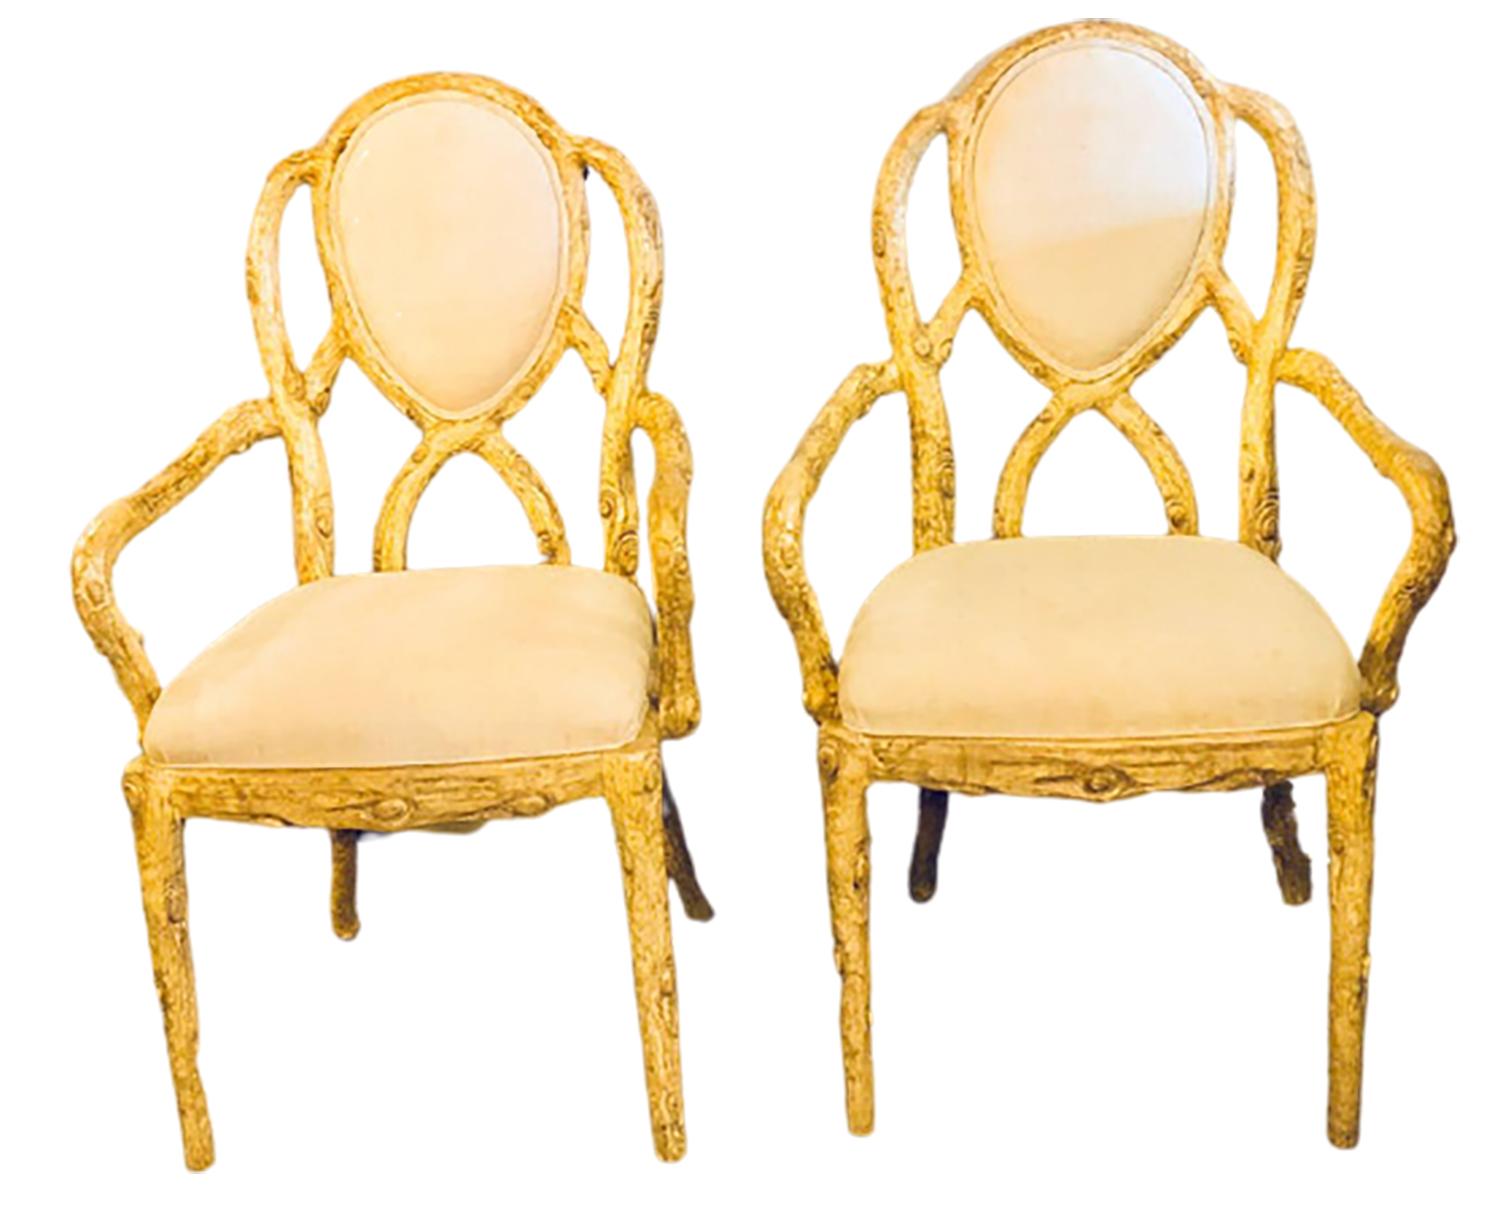 Pair of Hollywood Regency style tree trunk form designed armchairs. Each of these newly upholstered armchairs have been designed to look as though they were carved from a tree branch. The pair having comfortable sets and back rests with flowing